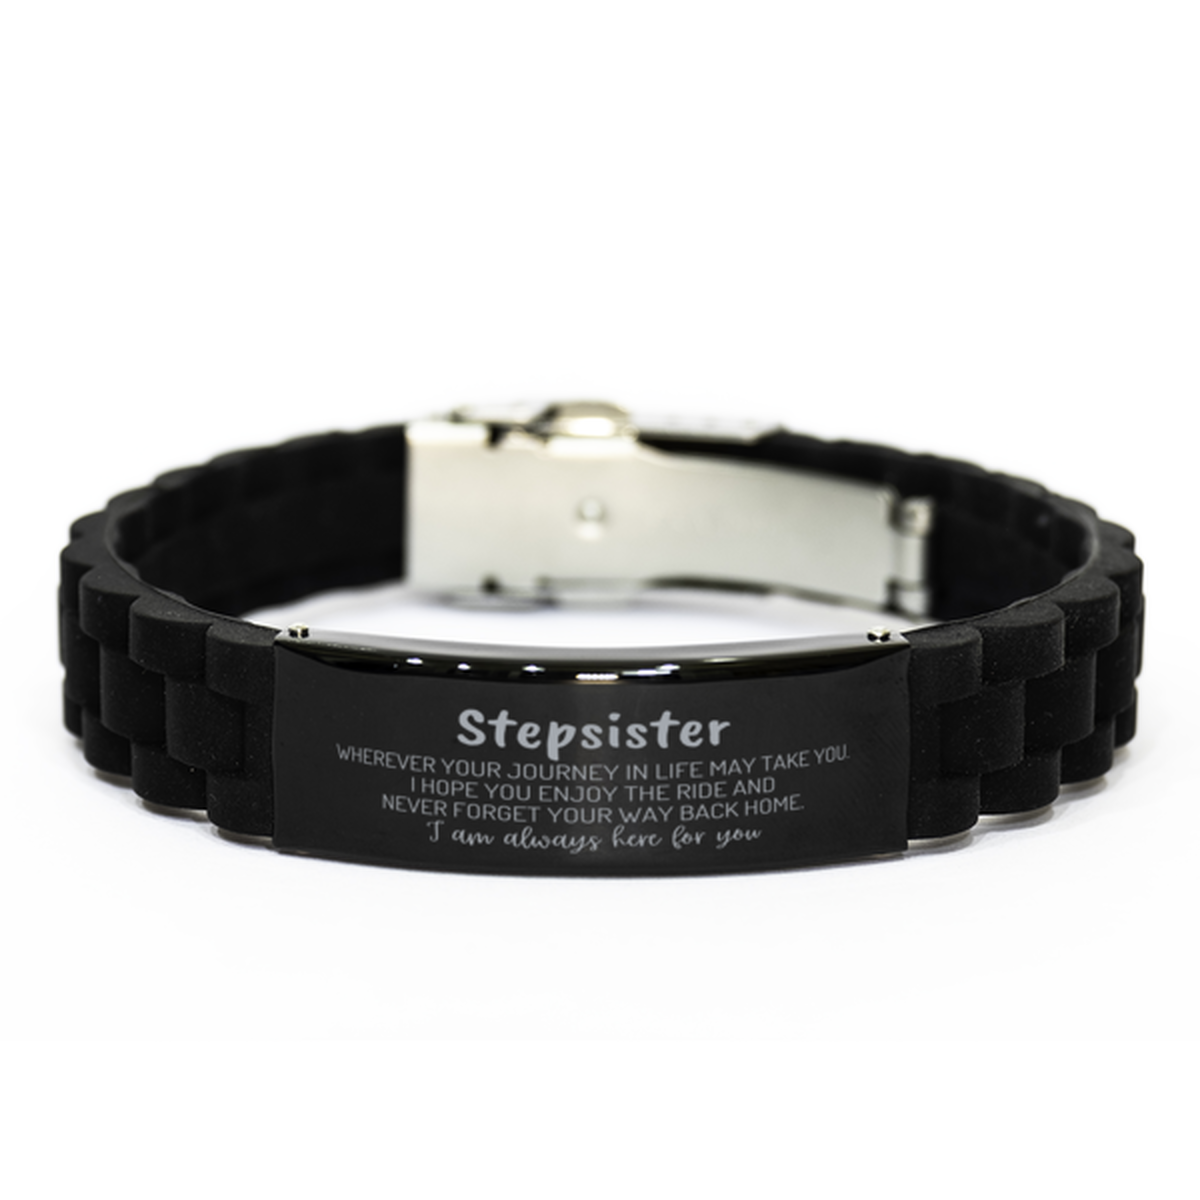 Stepsister wherever your journey in life may take you, I am always here for you Stepsister Black Glidelock Clasp Bracelet, Awesome Christmas Gifts For Stepsister, Stepsister Birthday Gifts for Men Women Family Loved One